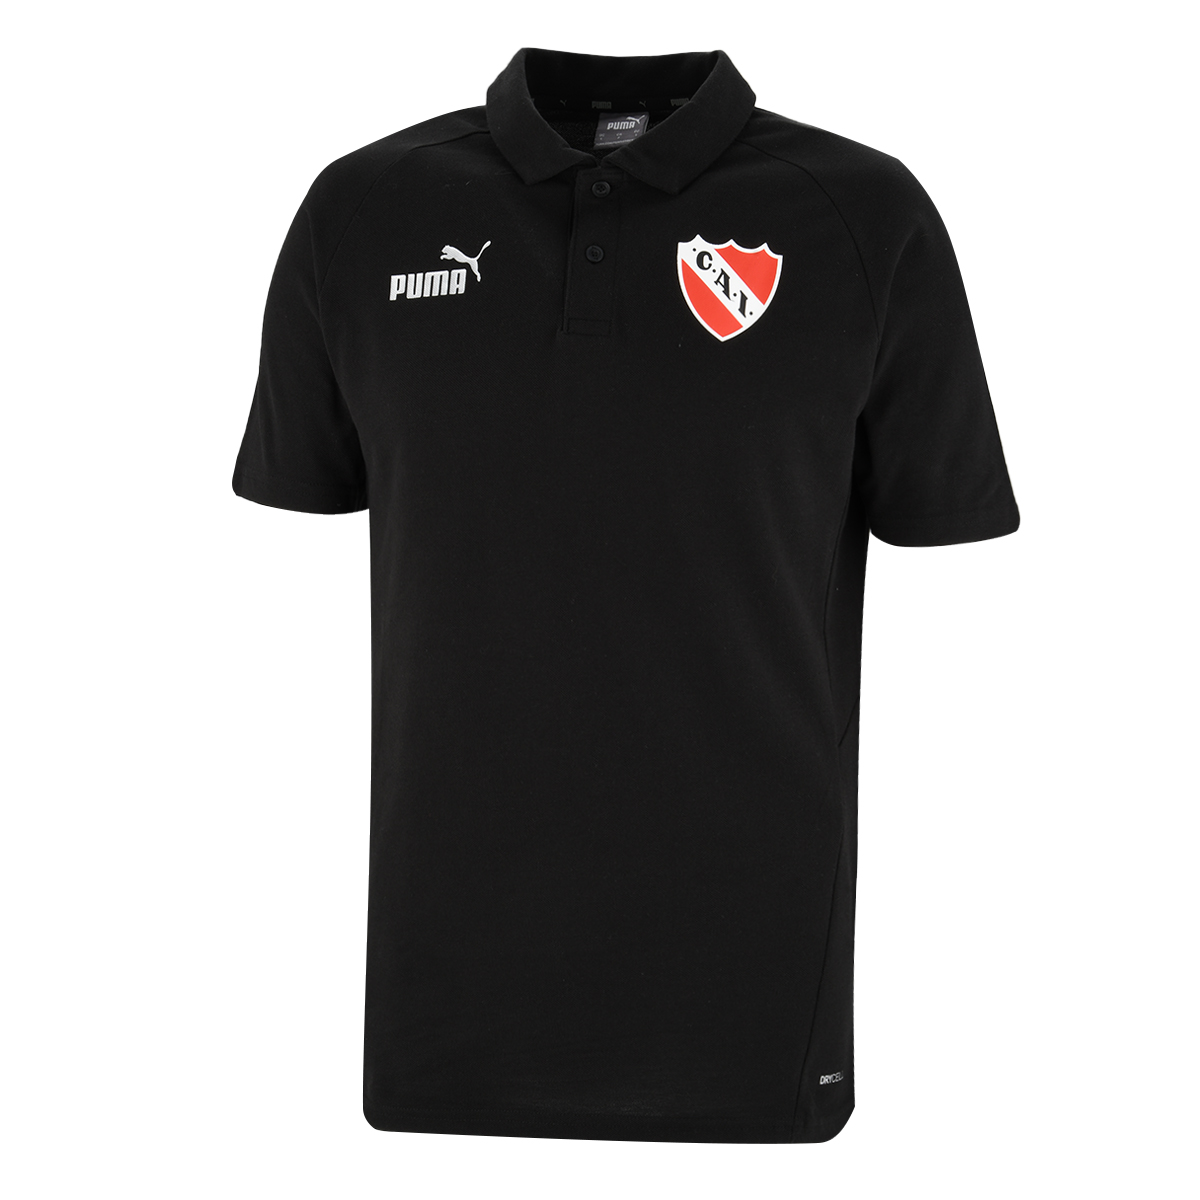 Chomba Puma Club Atlético Independiente Casuals Hombre,  image number null